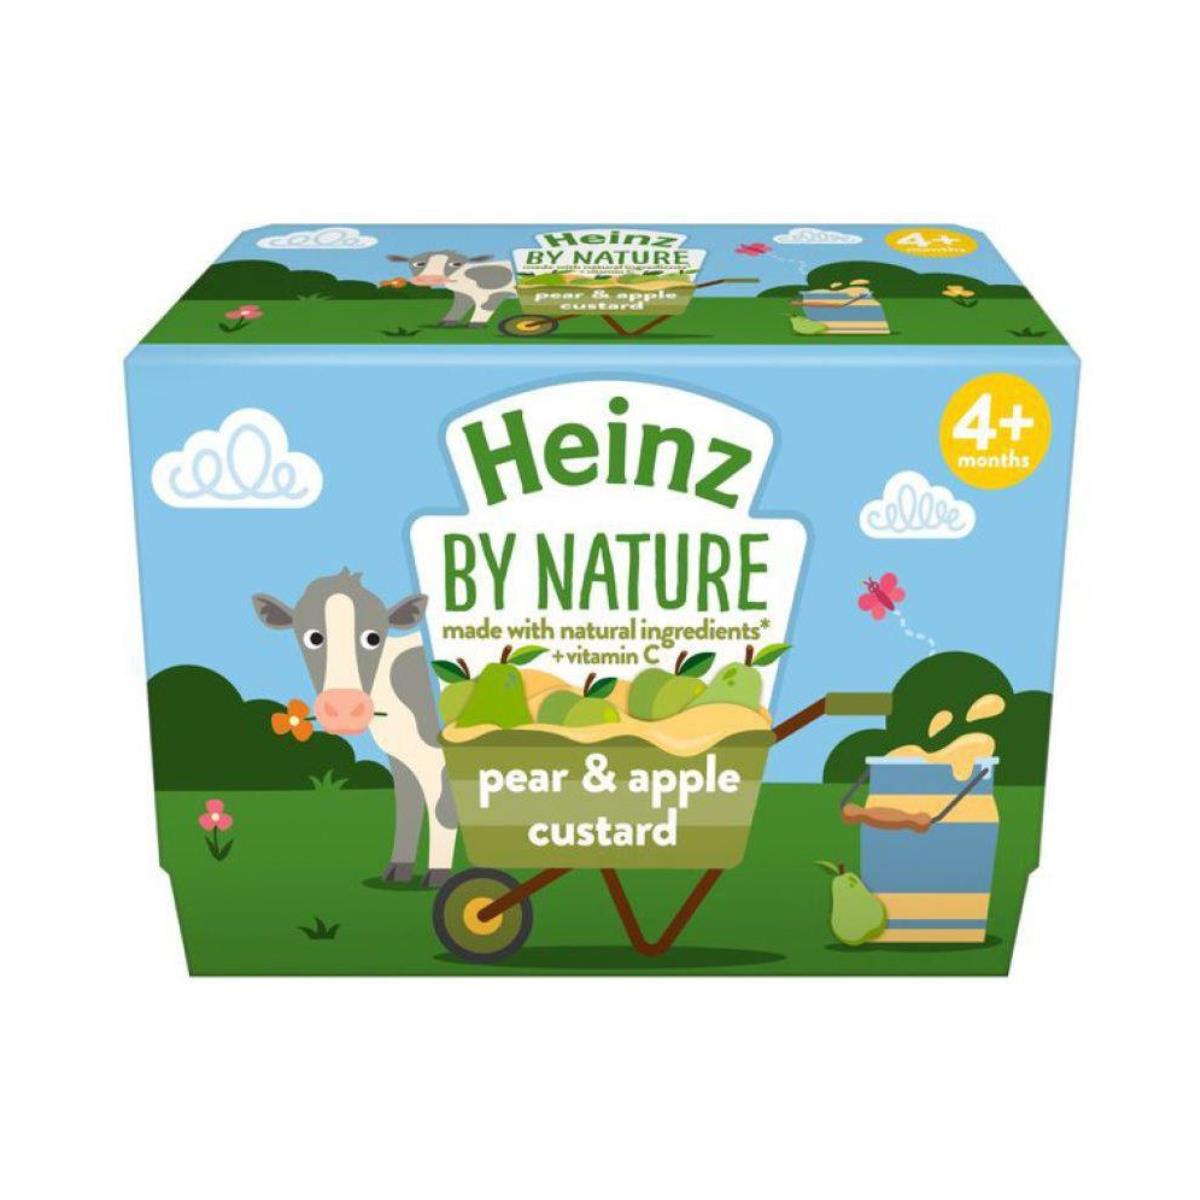 Heinz by Nature Pear & Apple Custrad (Pack of 4) - 400g (4x100g)